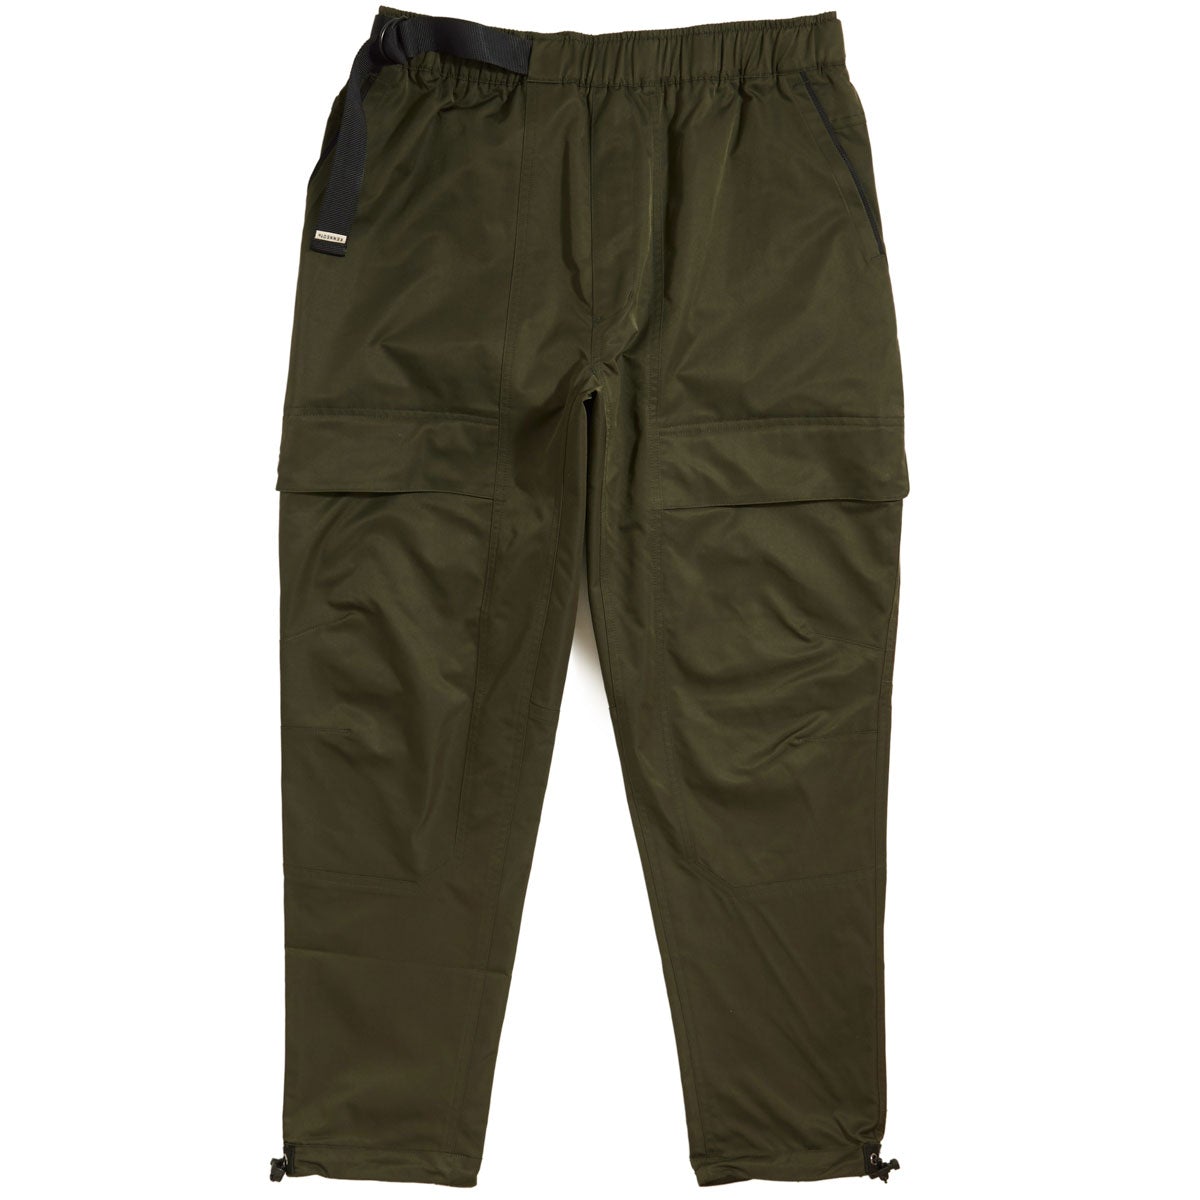 Kennedy The Flight Cargo Pants - Fatigue image 1